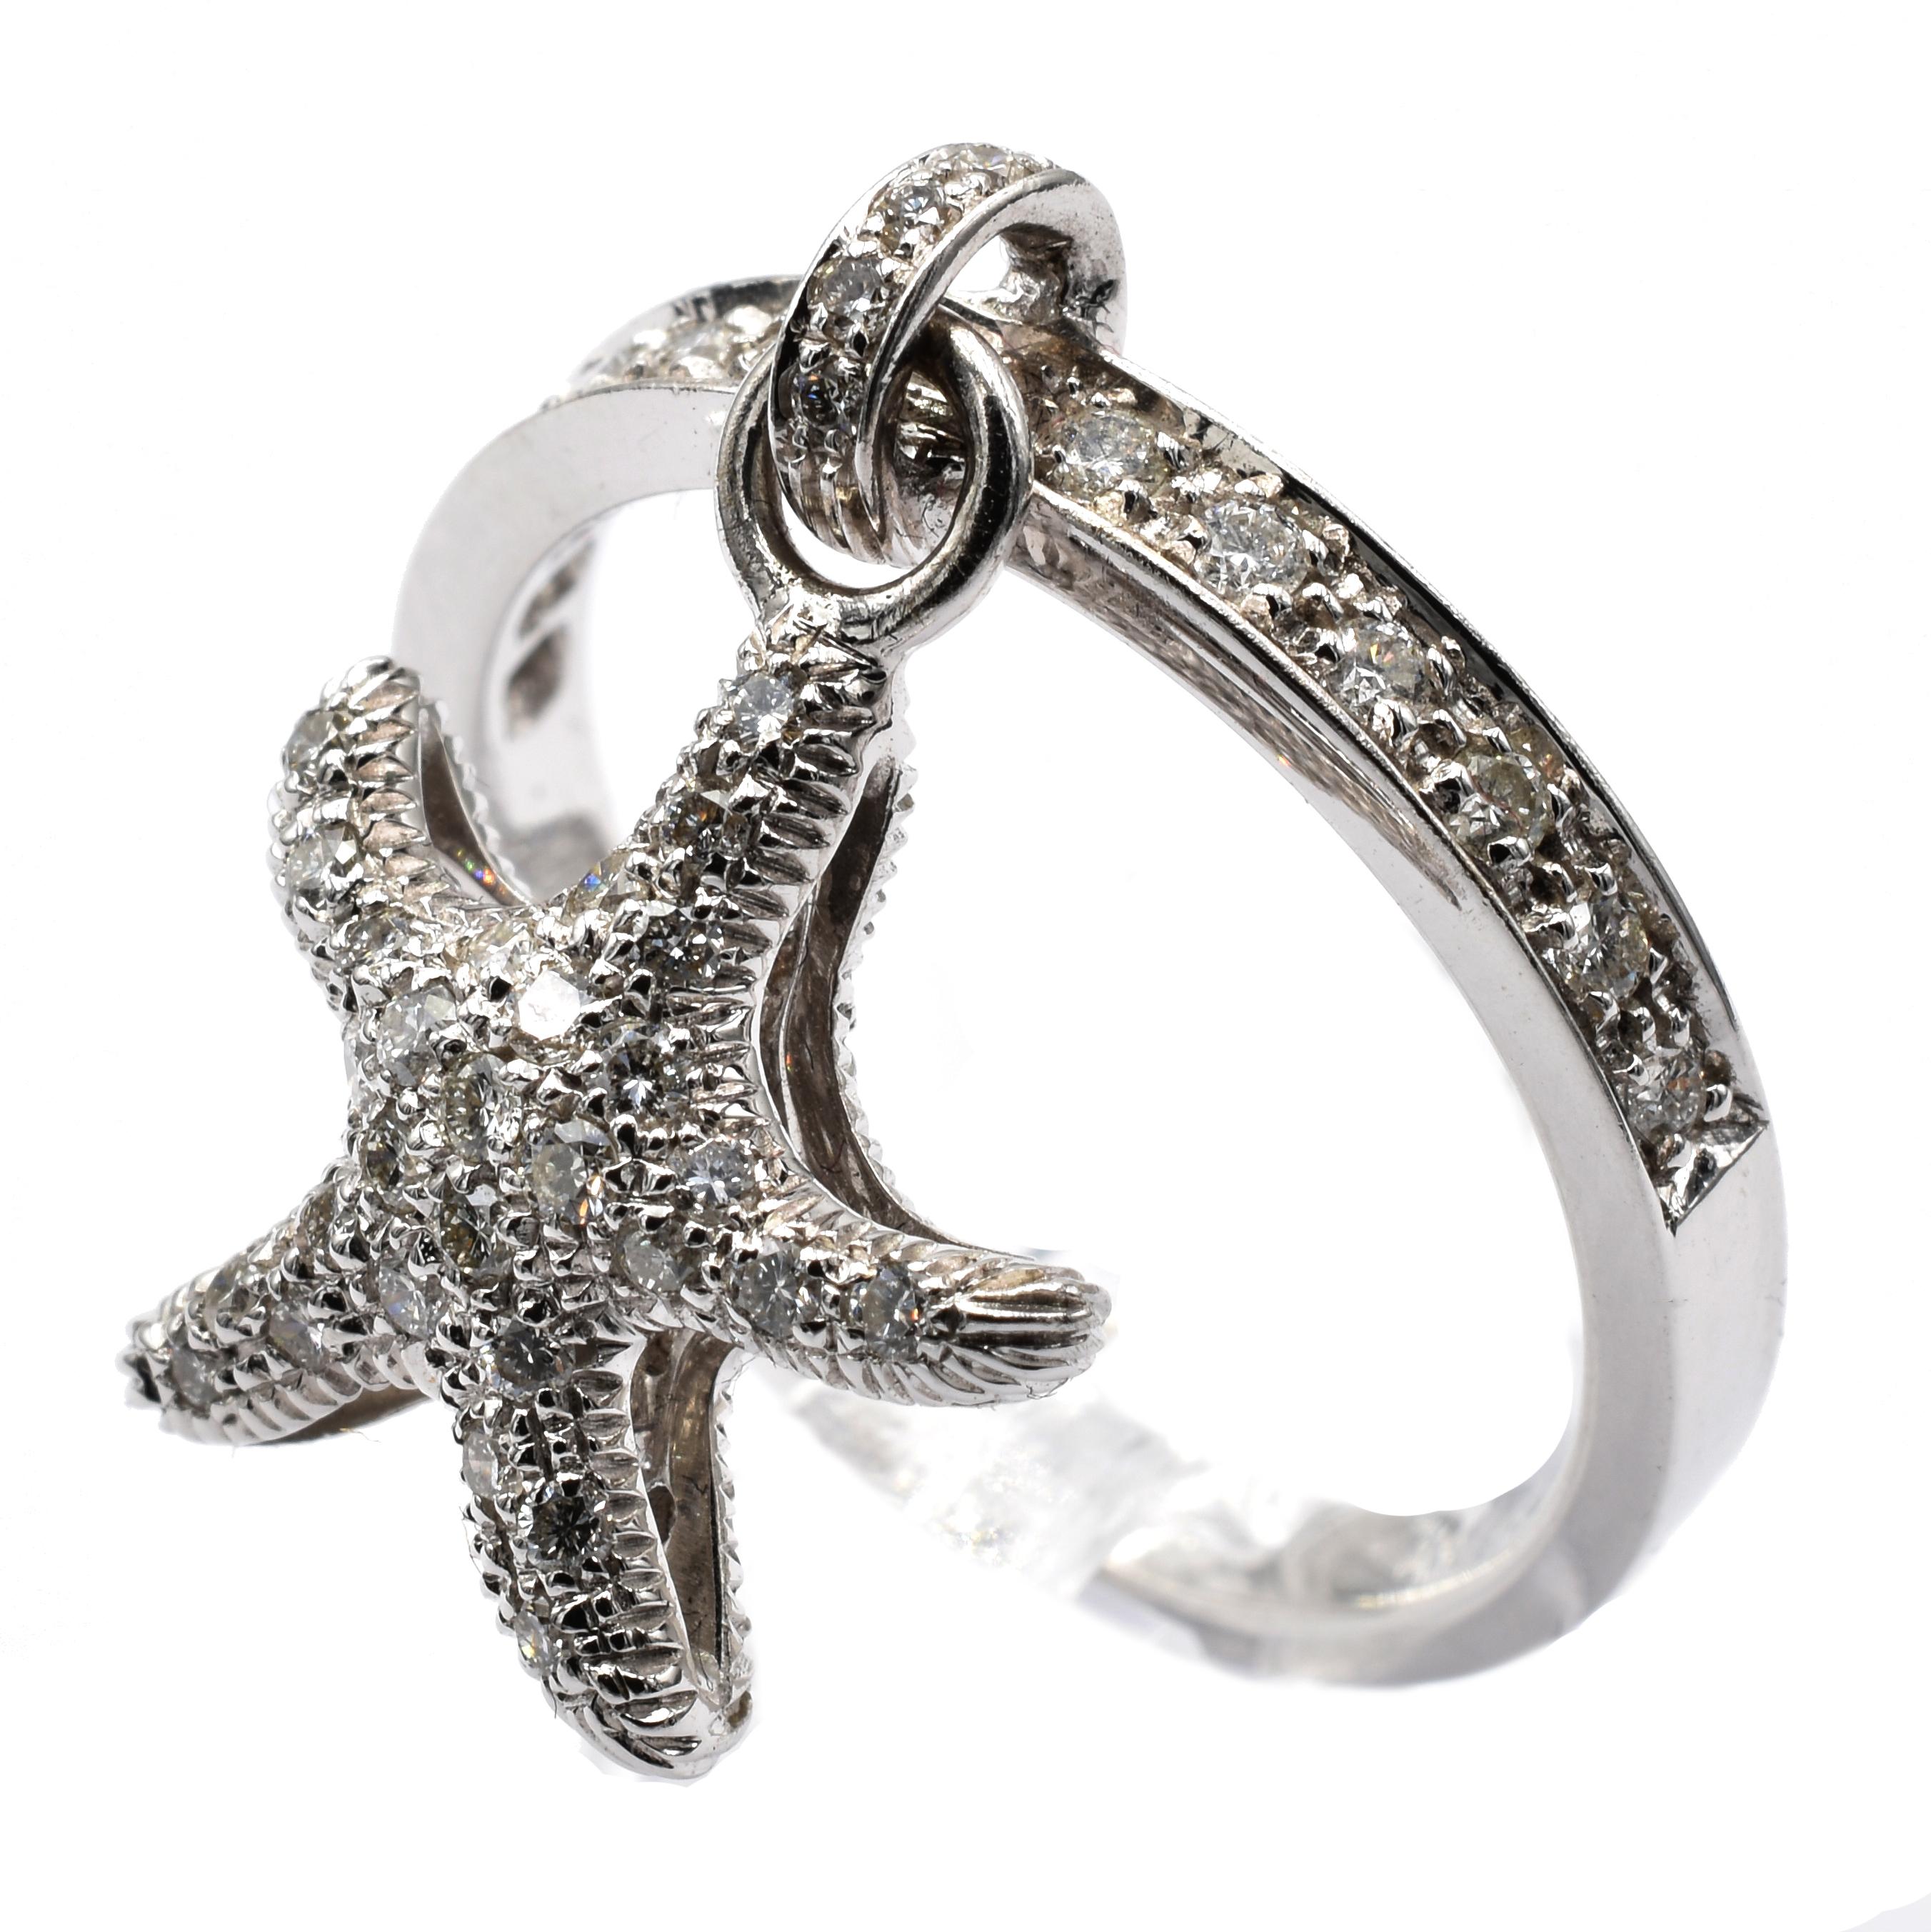 Gilberto Cassola 18Kt White Gold Ring with Pendant Starfish Charm. This Charm is set in both sides with Diamonds on White Gold and hangs freely on the ring.
A very Funny and Happy Piece that perfectly match with a Wedding Ring for an everyday